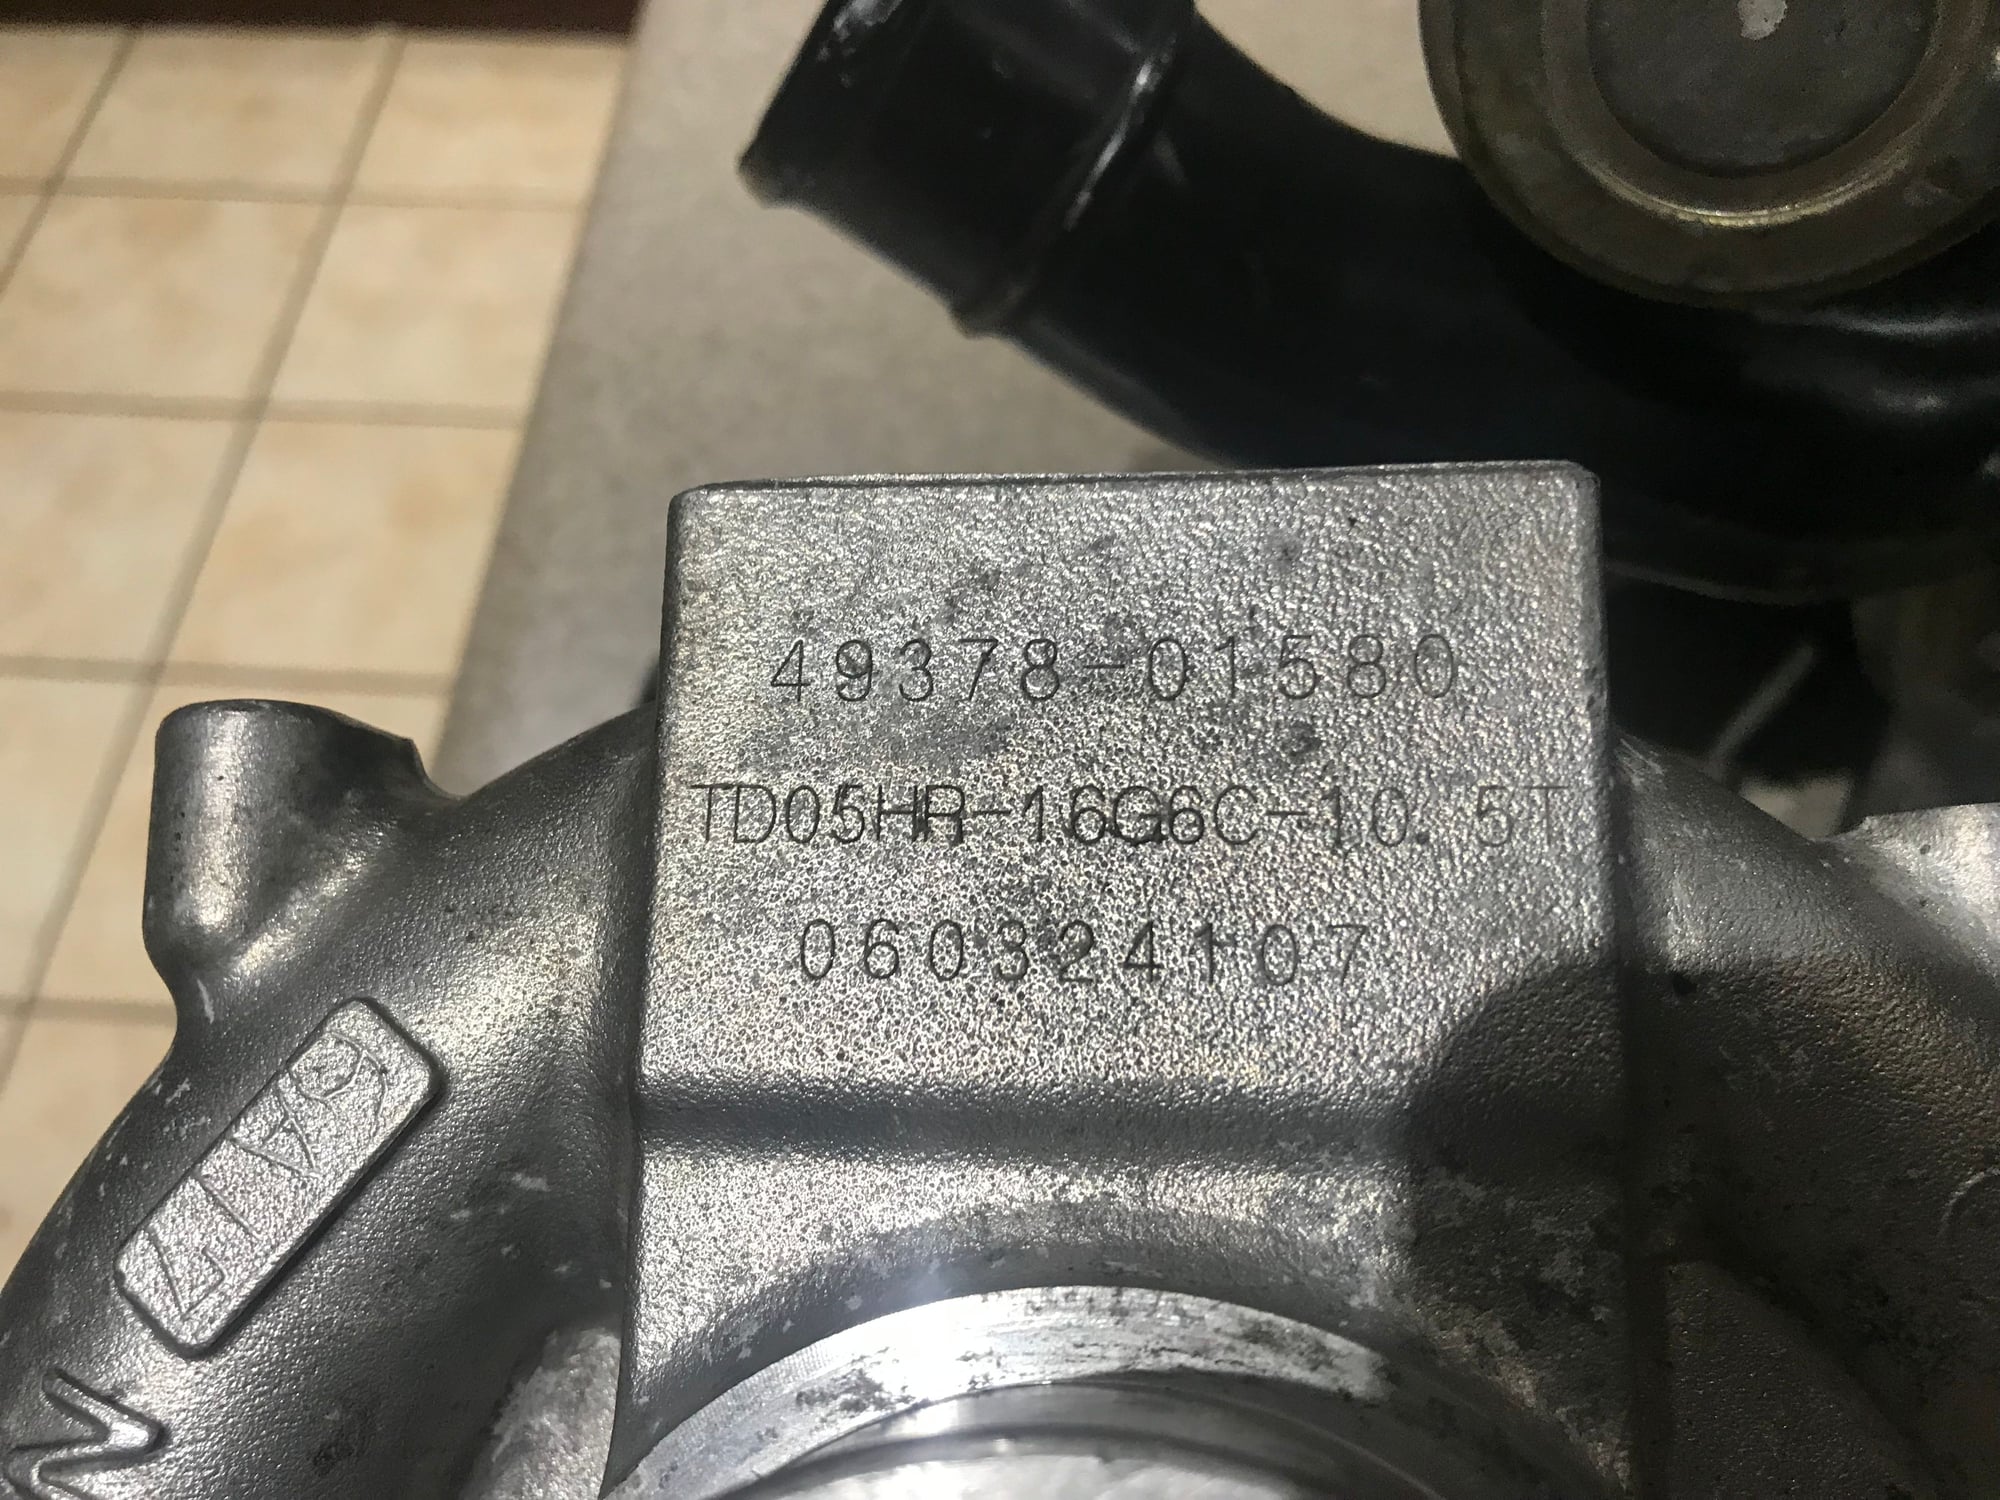 Engine - Power Adders - Evo 8/9 Low Priced Parts - Used - 2003 to 2006 Mitsubishi Lancer Evolution - Plano, TX 75035, United States